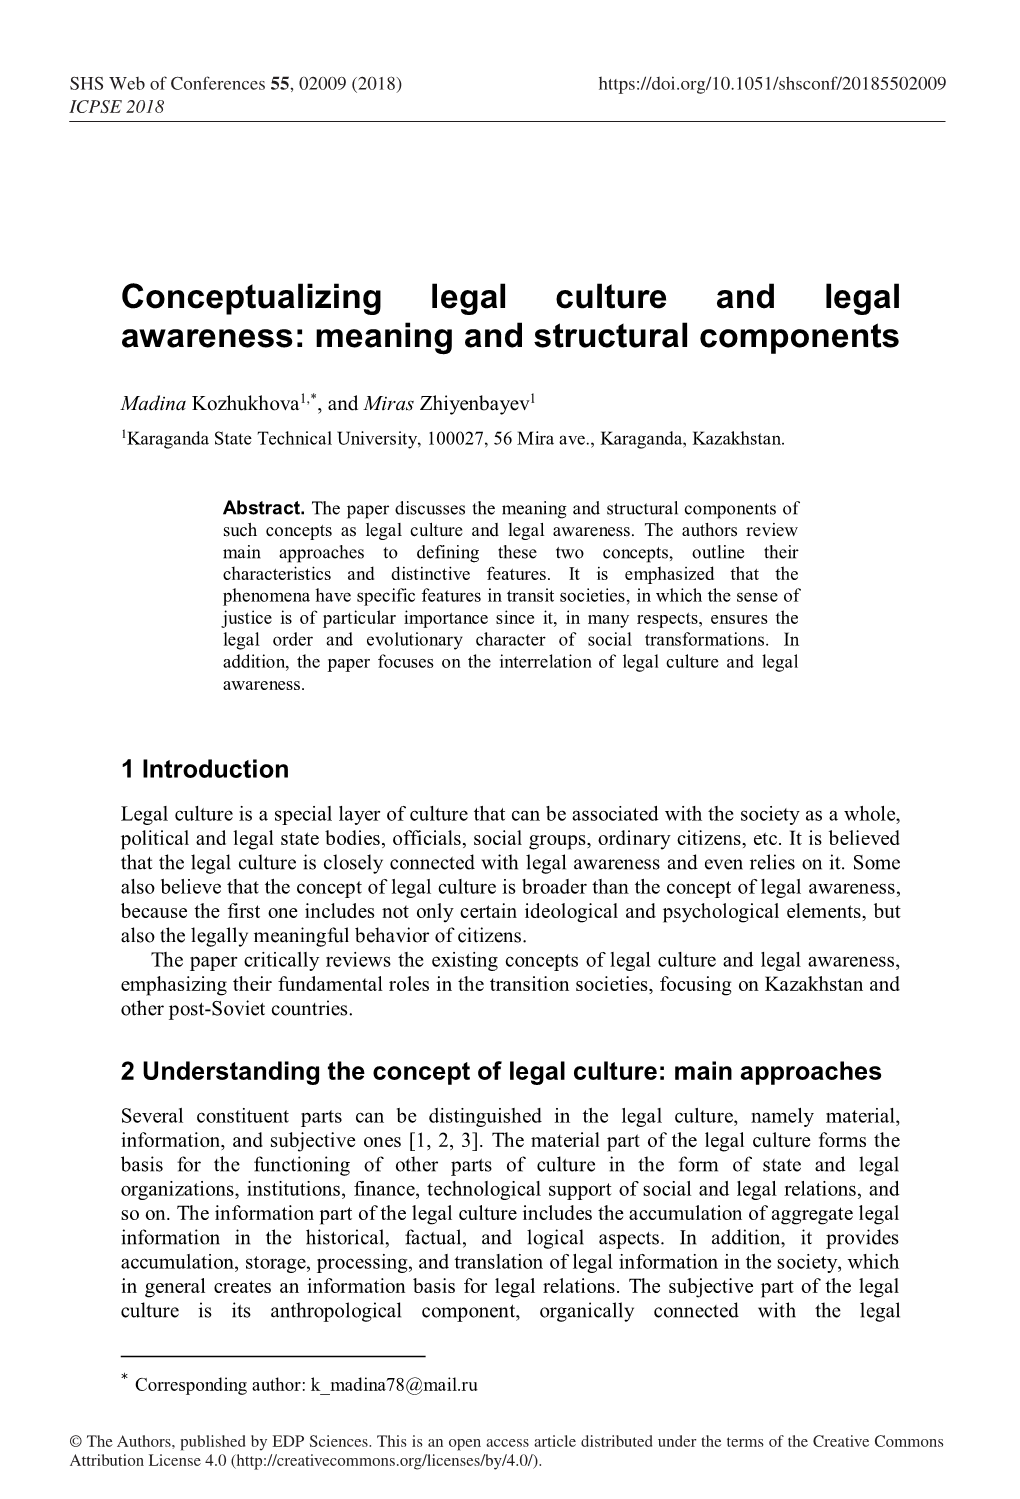 Conceptualizing Legal Culture and Legal Awareness: Meaning and Structural Components